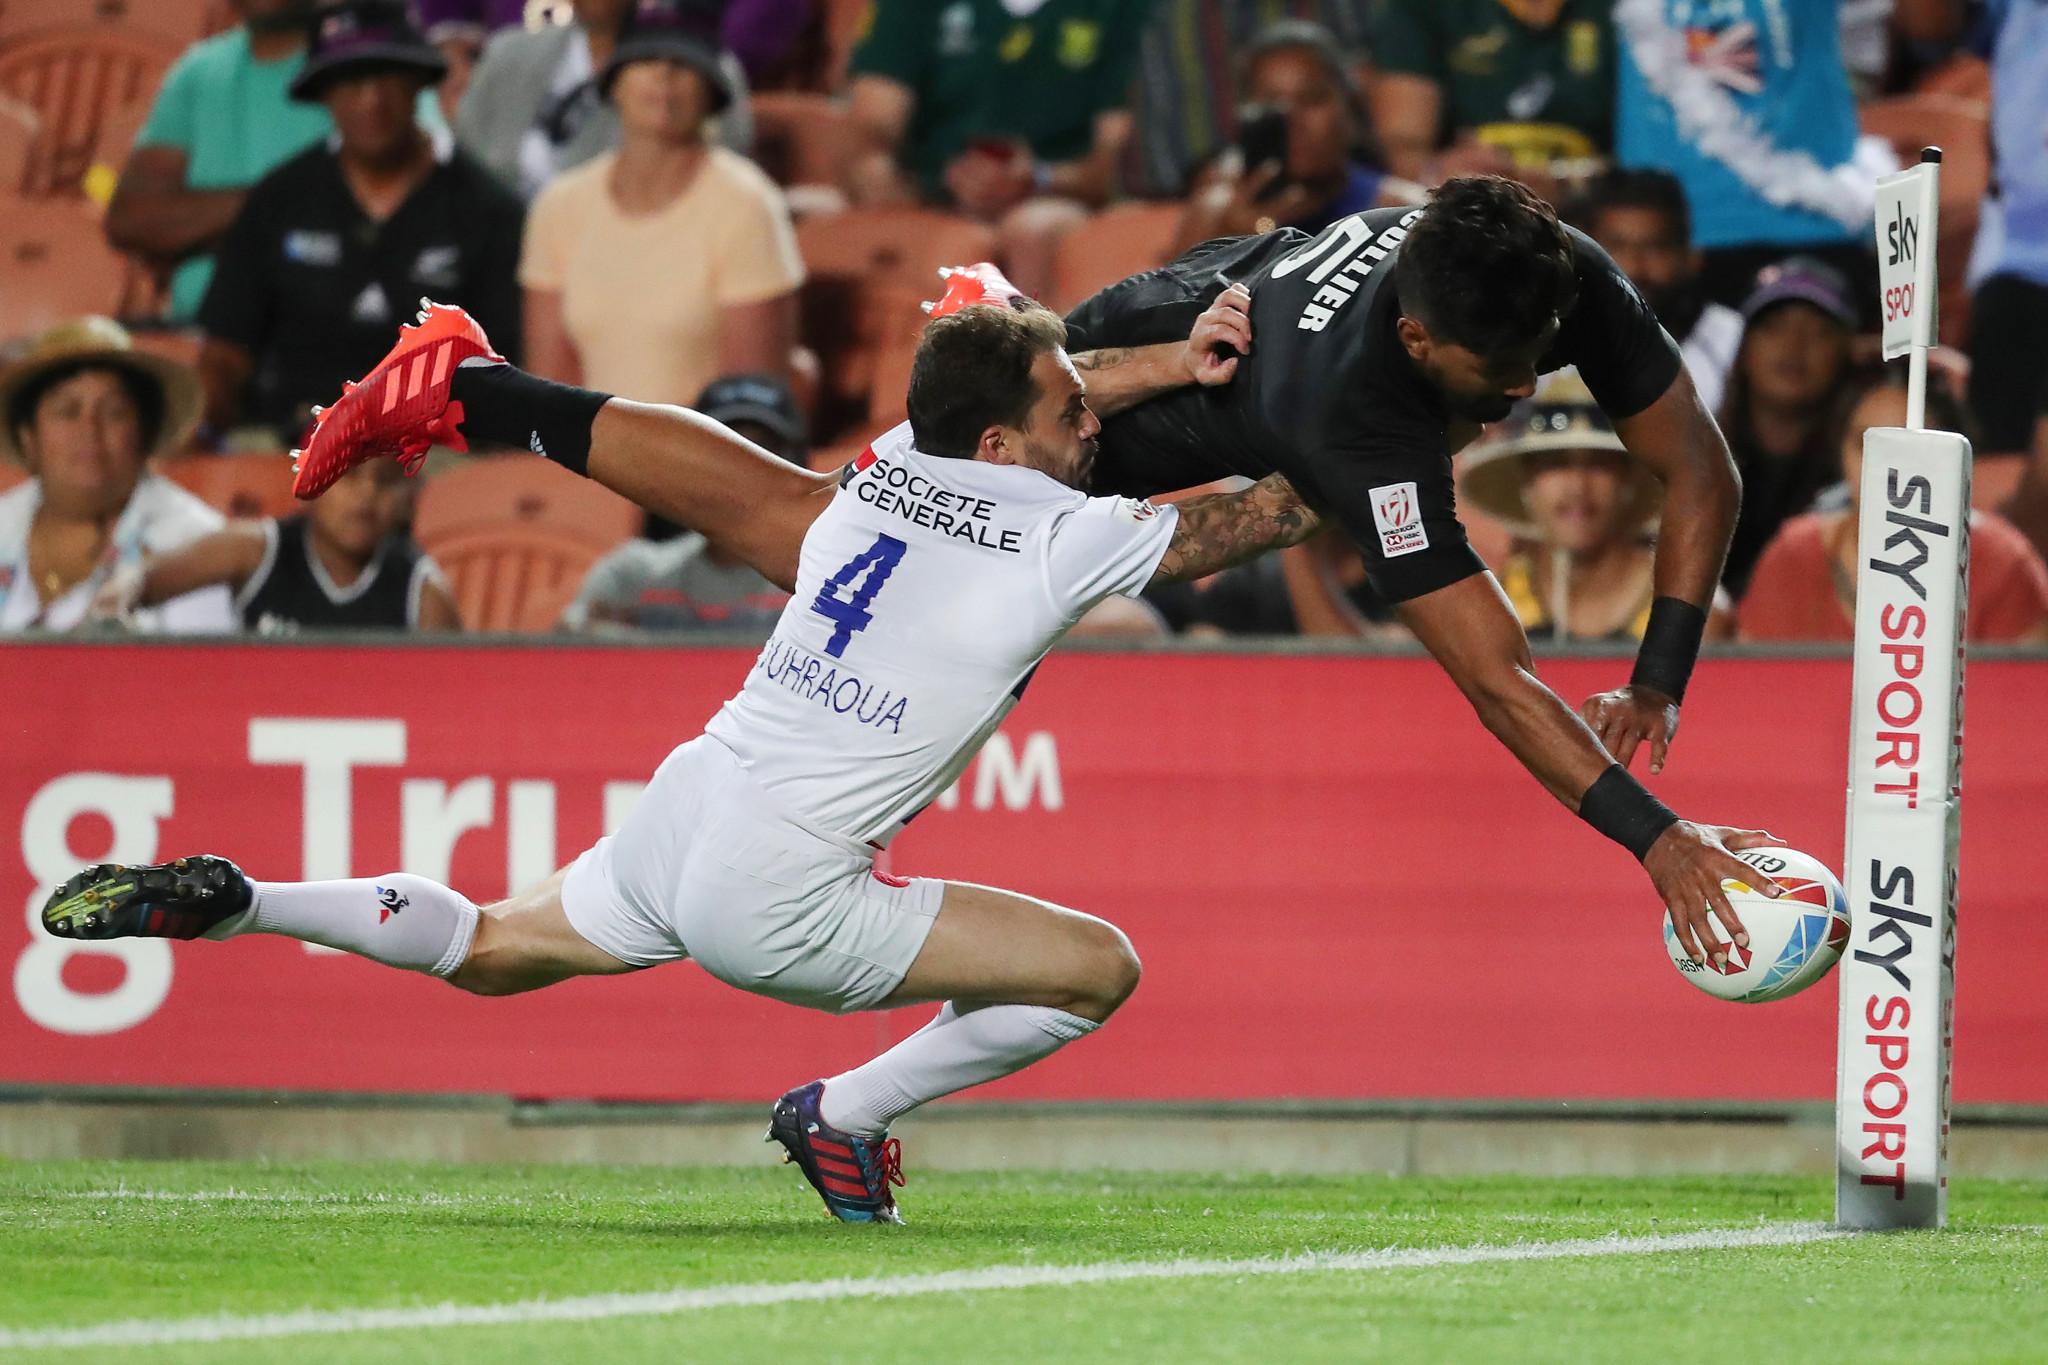 New Zealand crowned champions in home leg of men's World Rugby Sevens Series